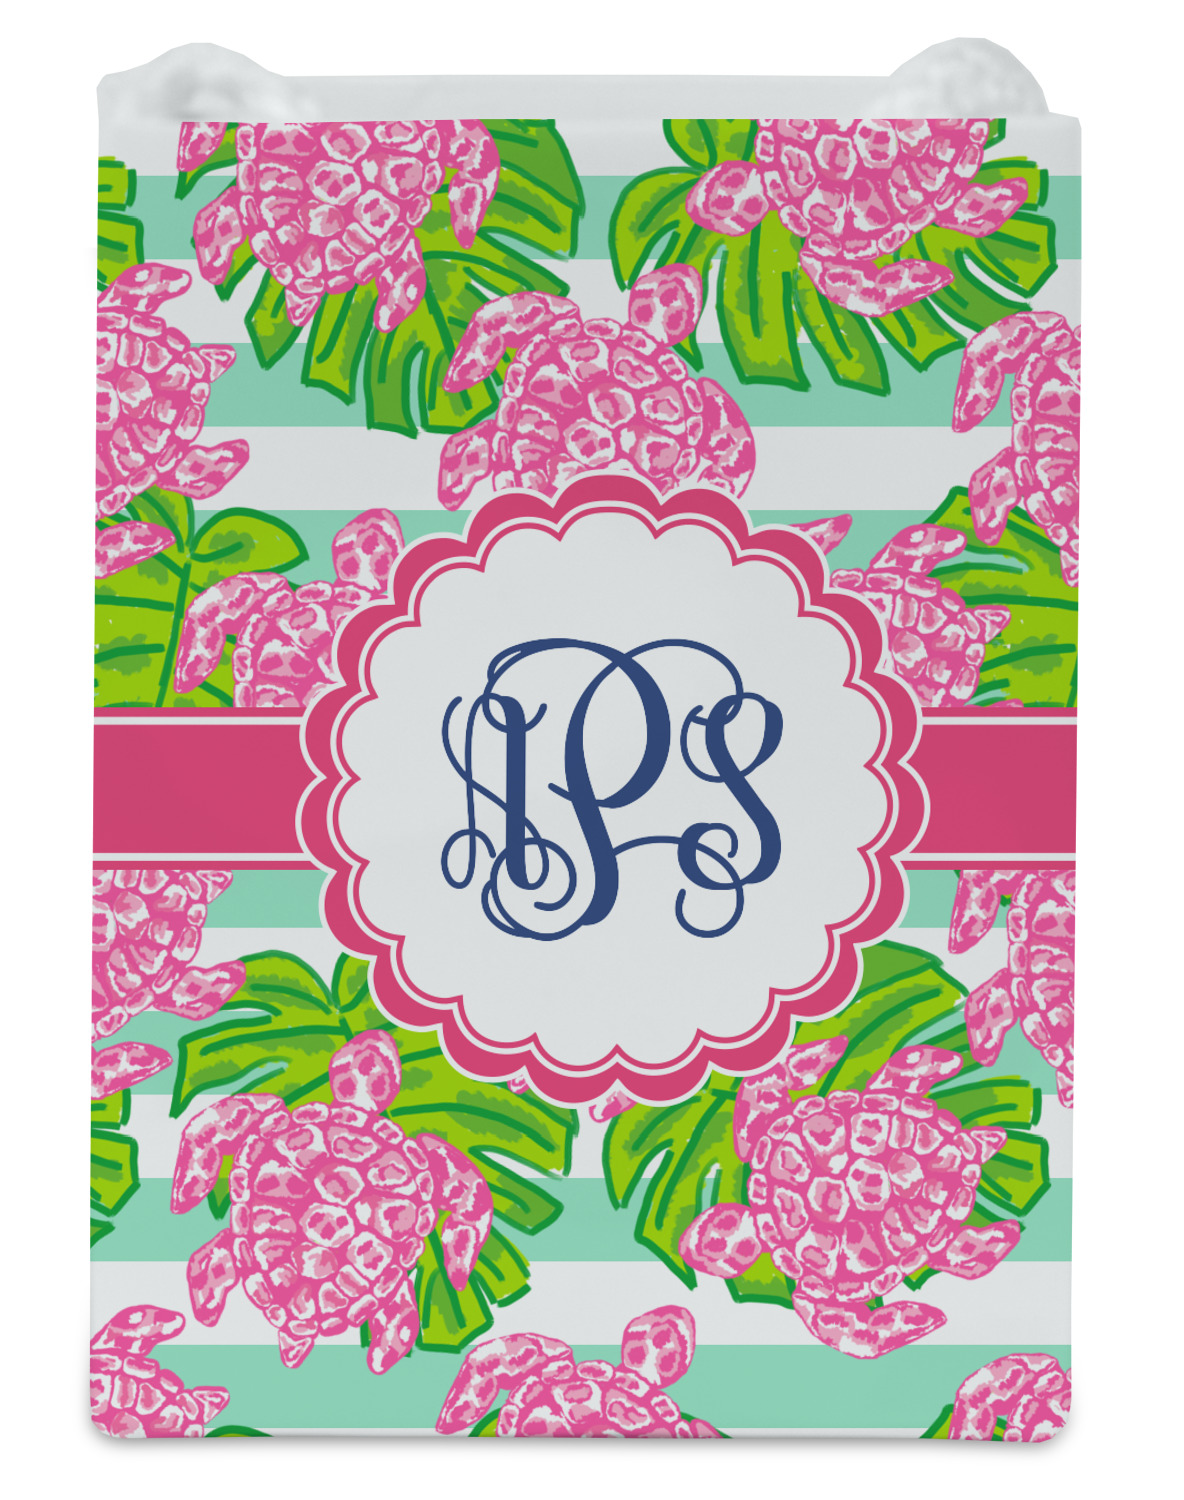 Preppy Monogrammed Gifts - Apparel, Bags, Jewelry